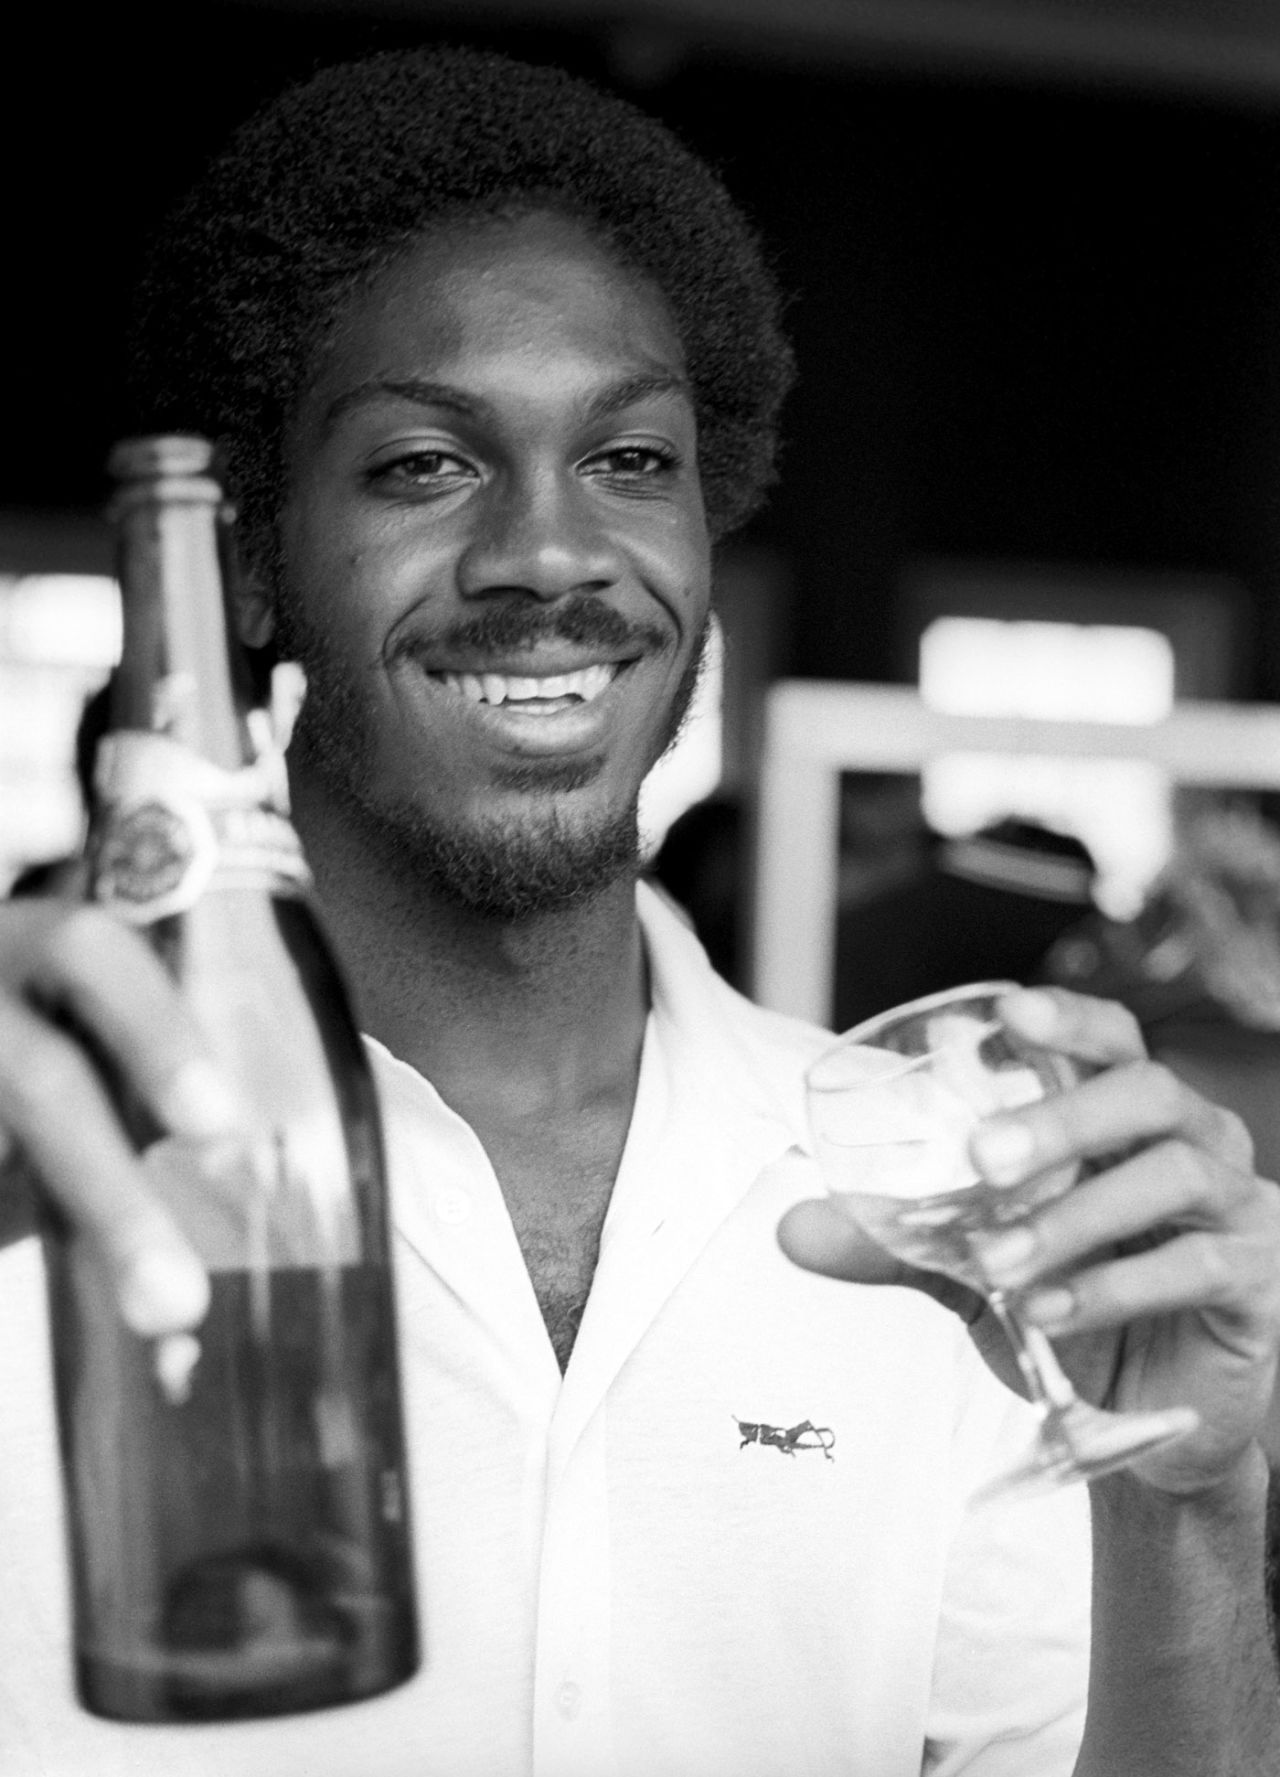 Michael Holding enjoys some champagne after his 14 wickets, England v West Indies, 5th Test, The Oval, 5th day, August 17, 1976